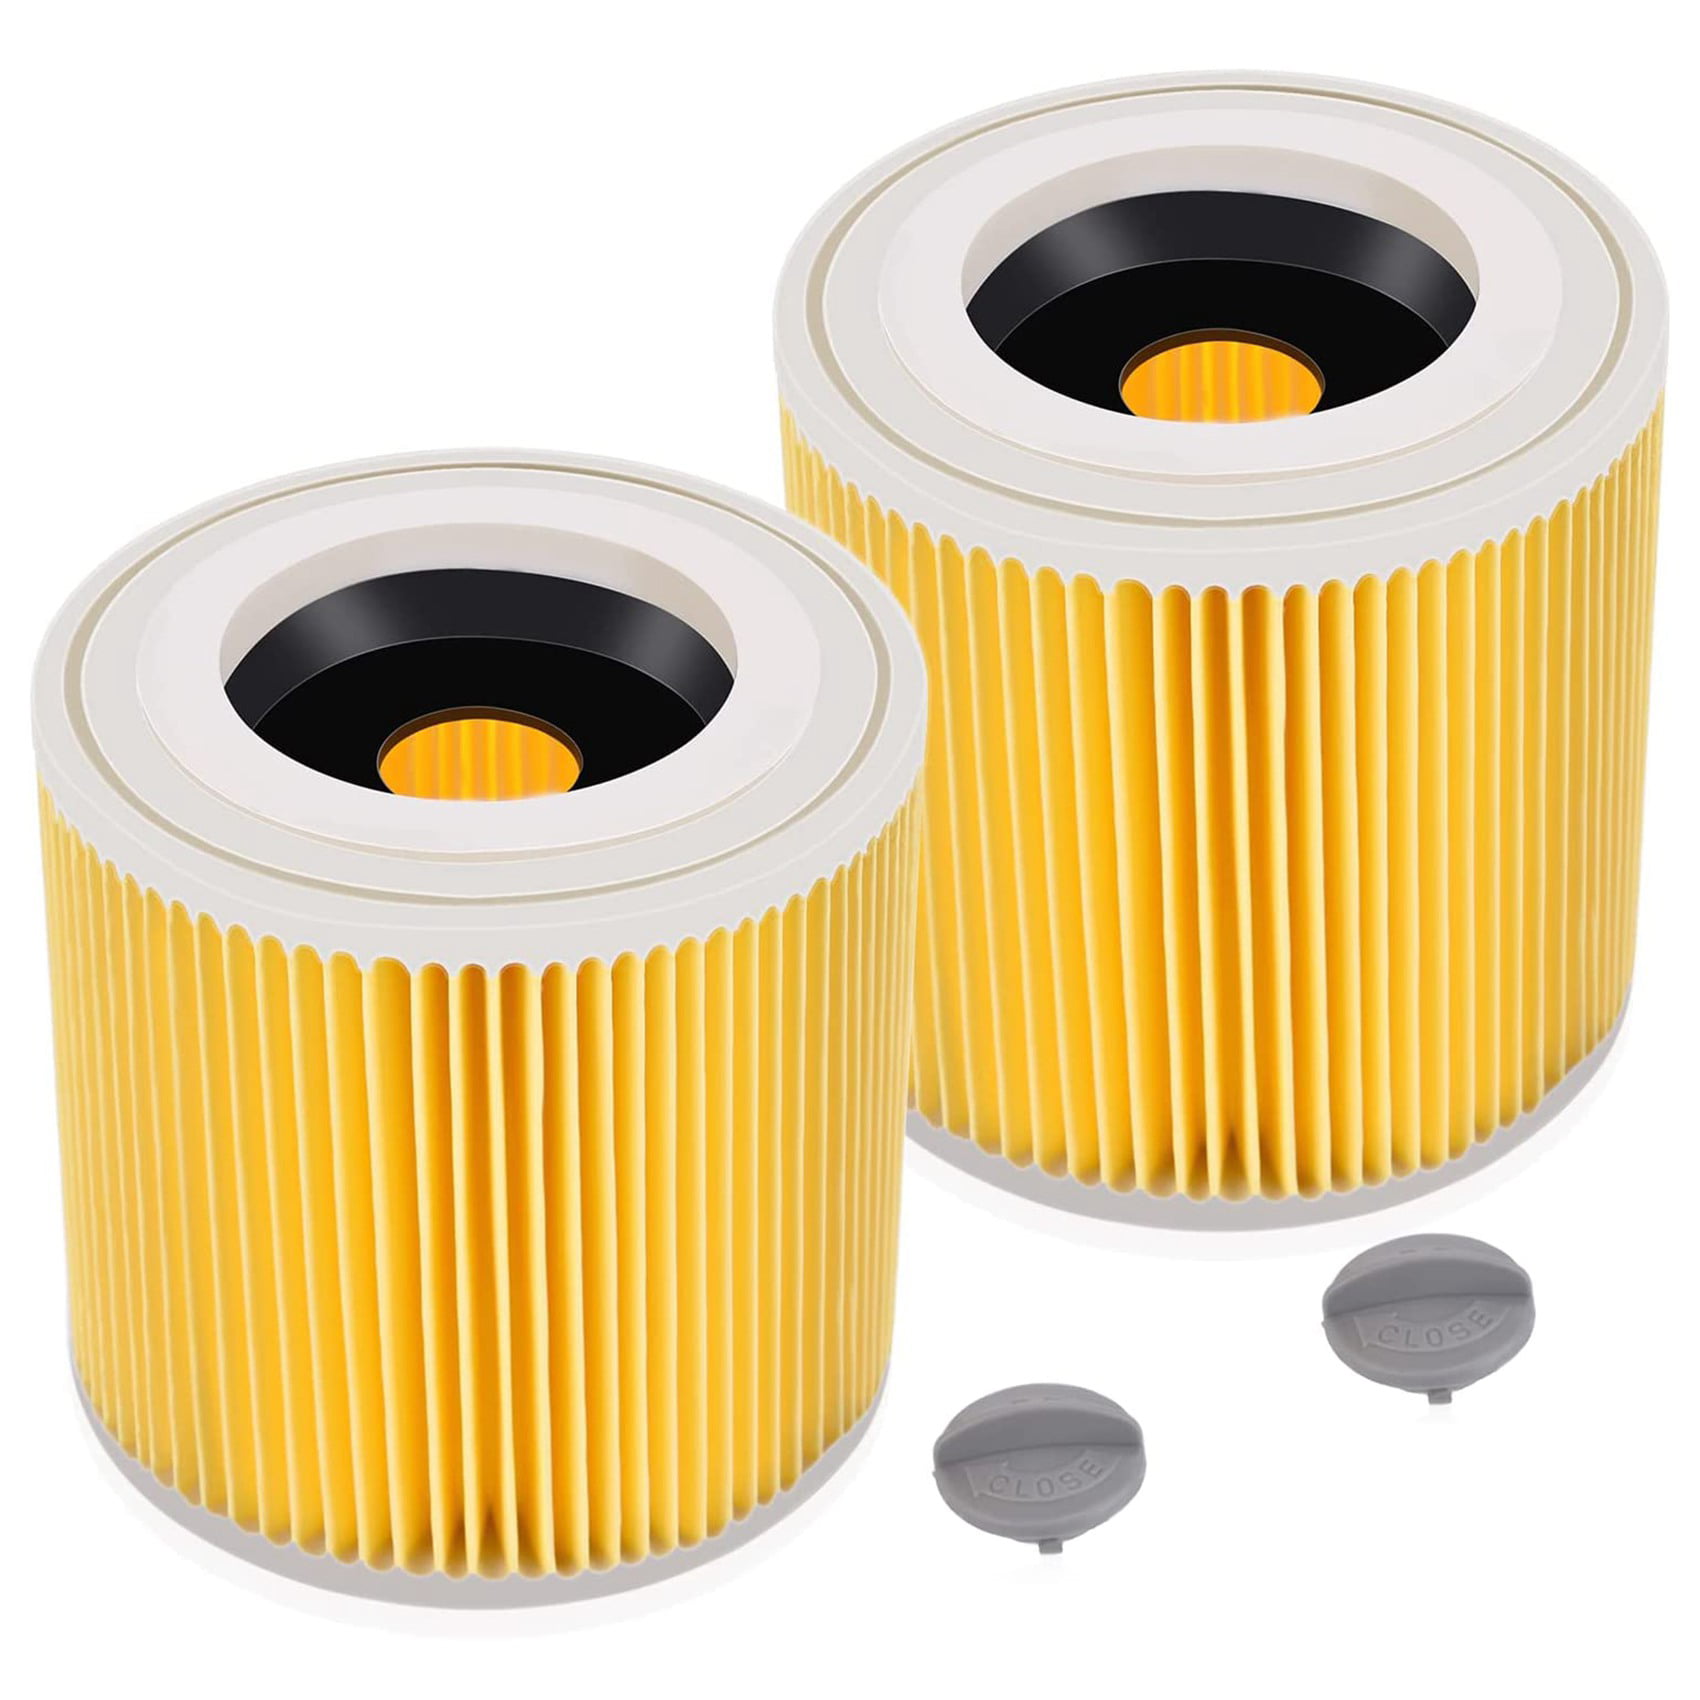 ZALAGA Cartridge Filter for KaRcher WD3 Premium WD2 WD3 WD3P WD3 MV2 MV3 Filter Replacement Filter for KaRcher Vacuum Cleaner -